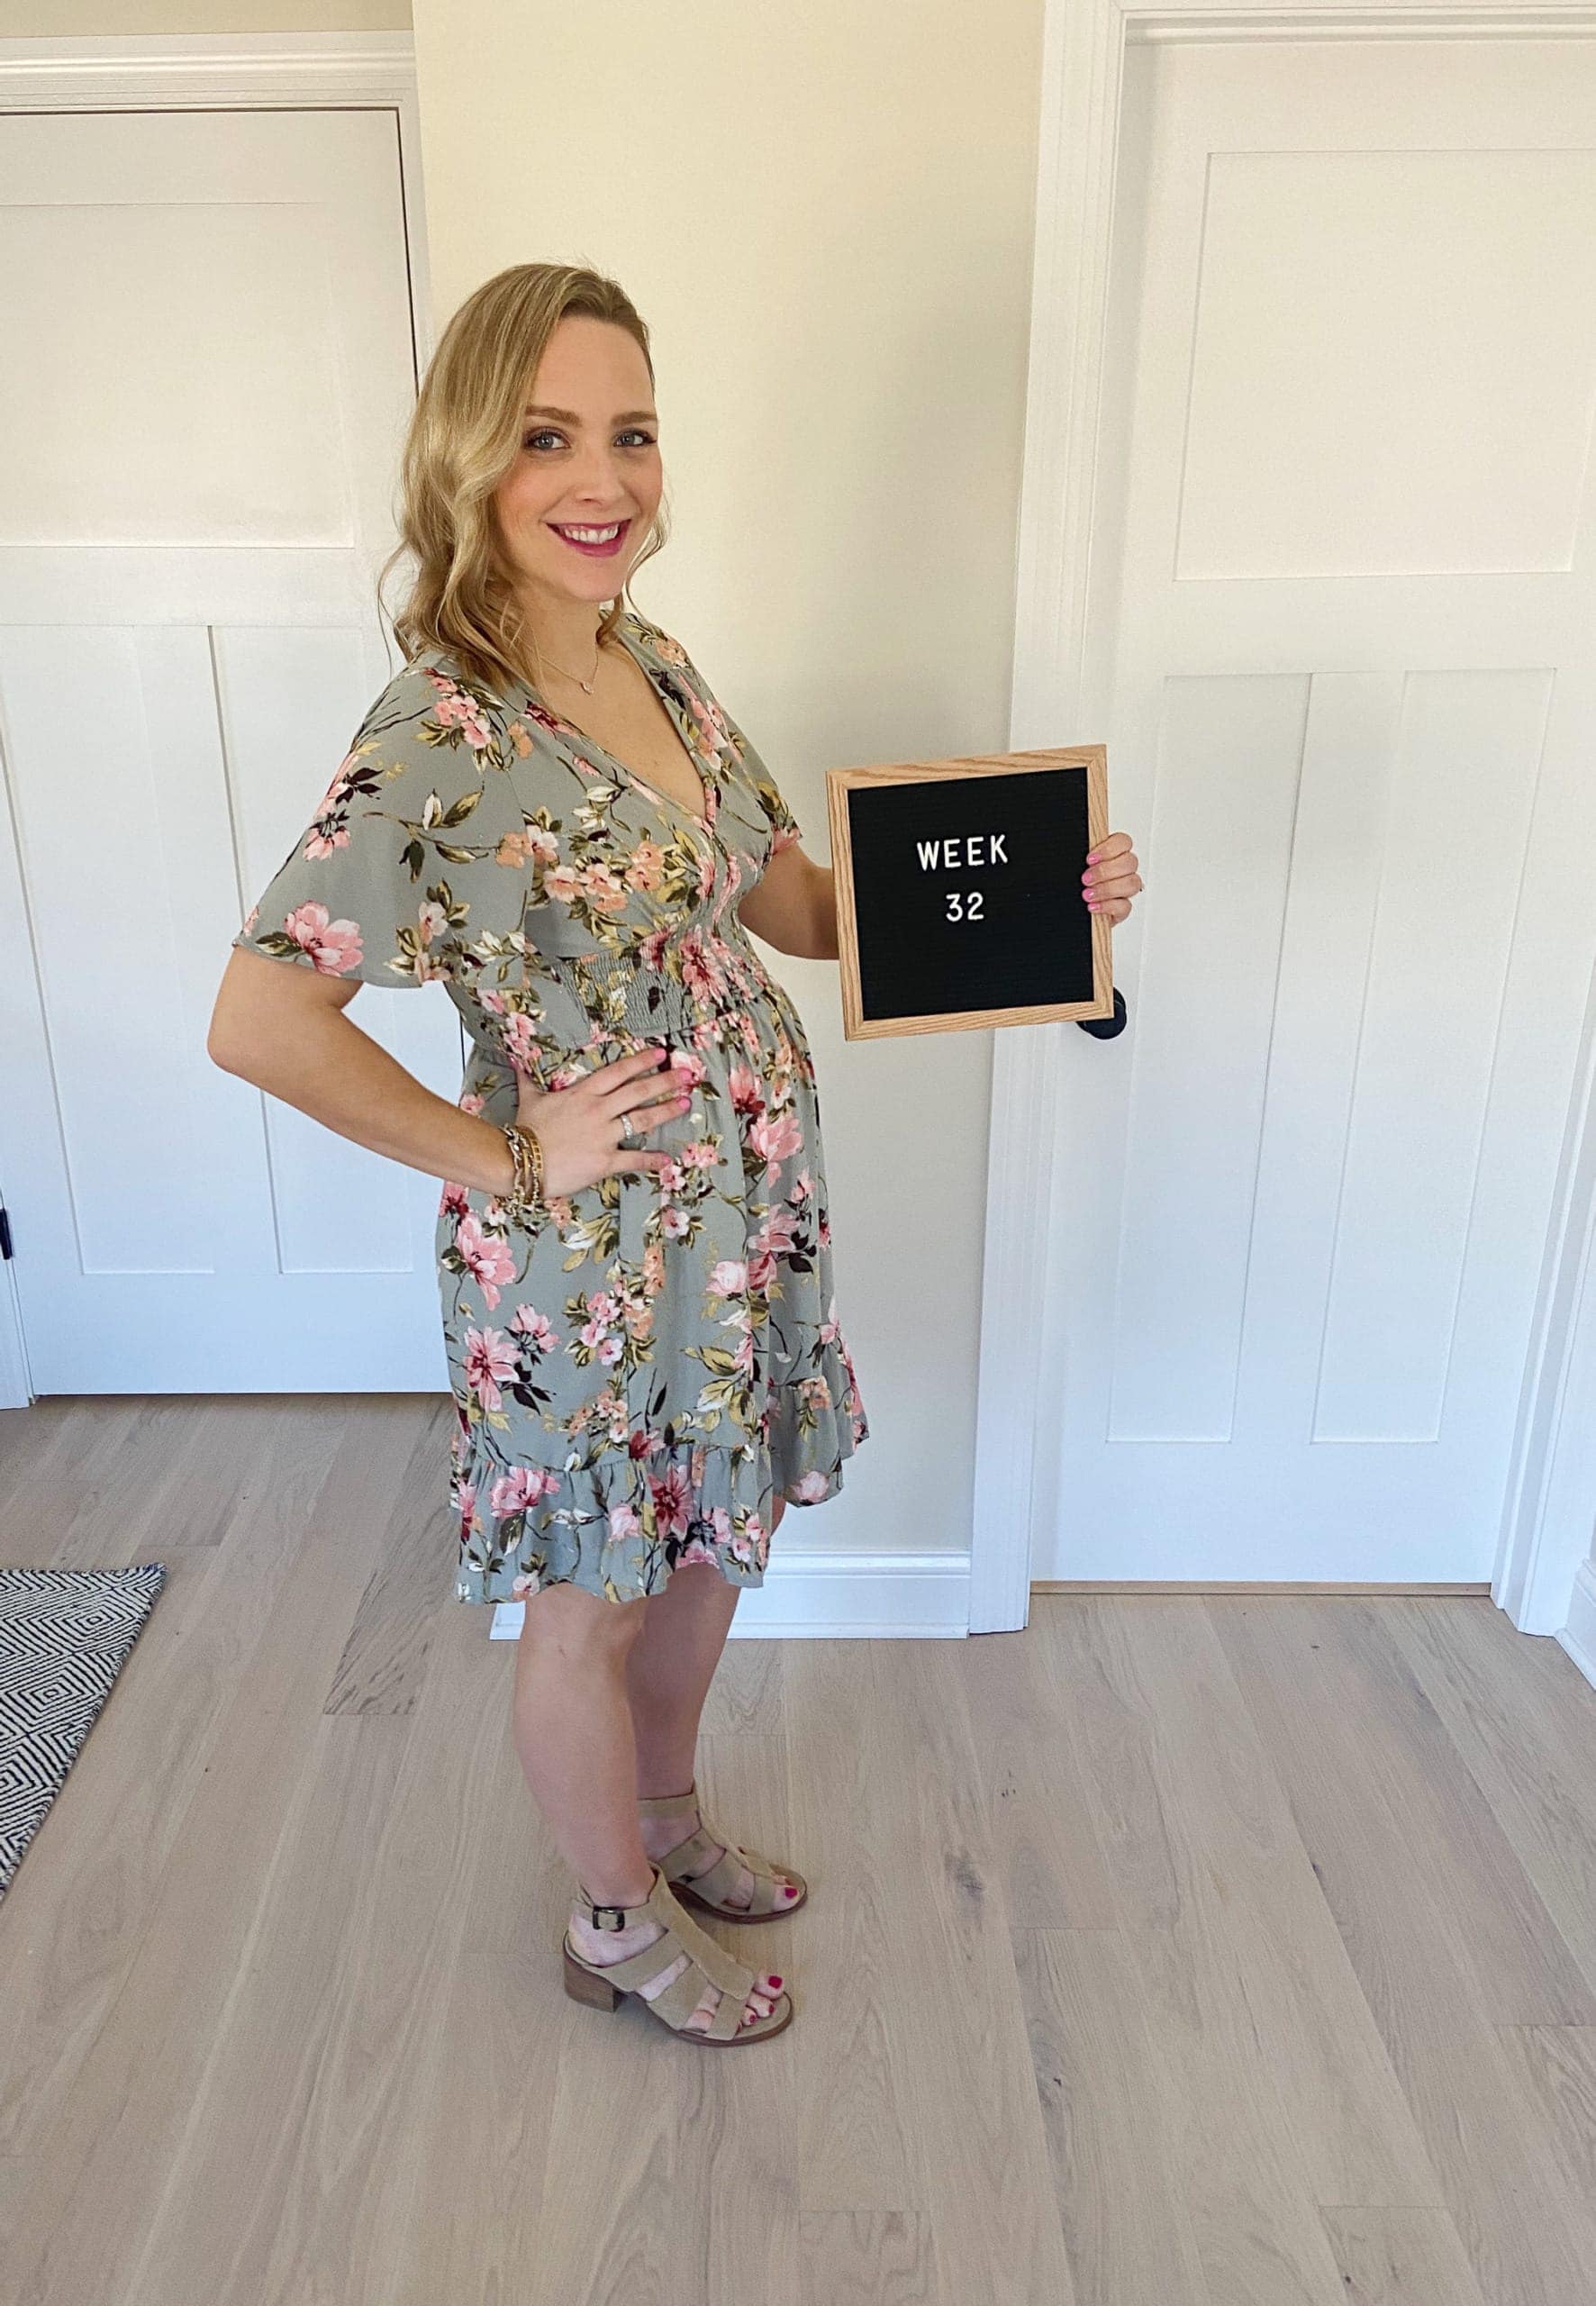 32 weeks pregnant during the third trimester